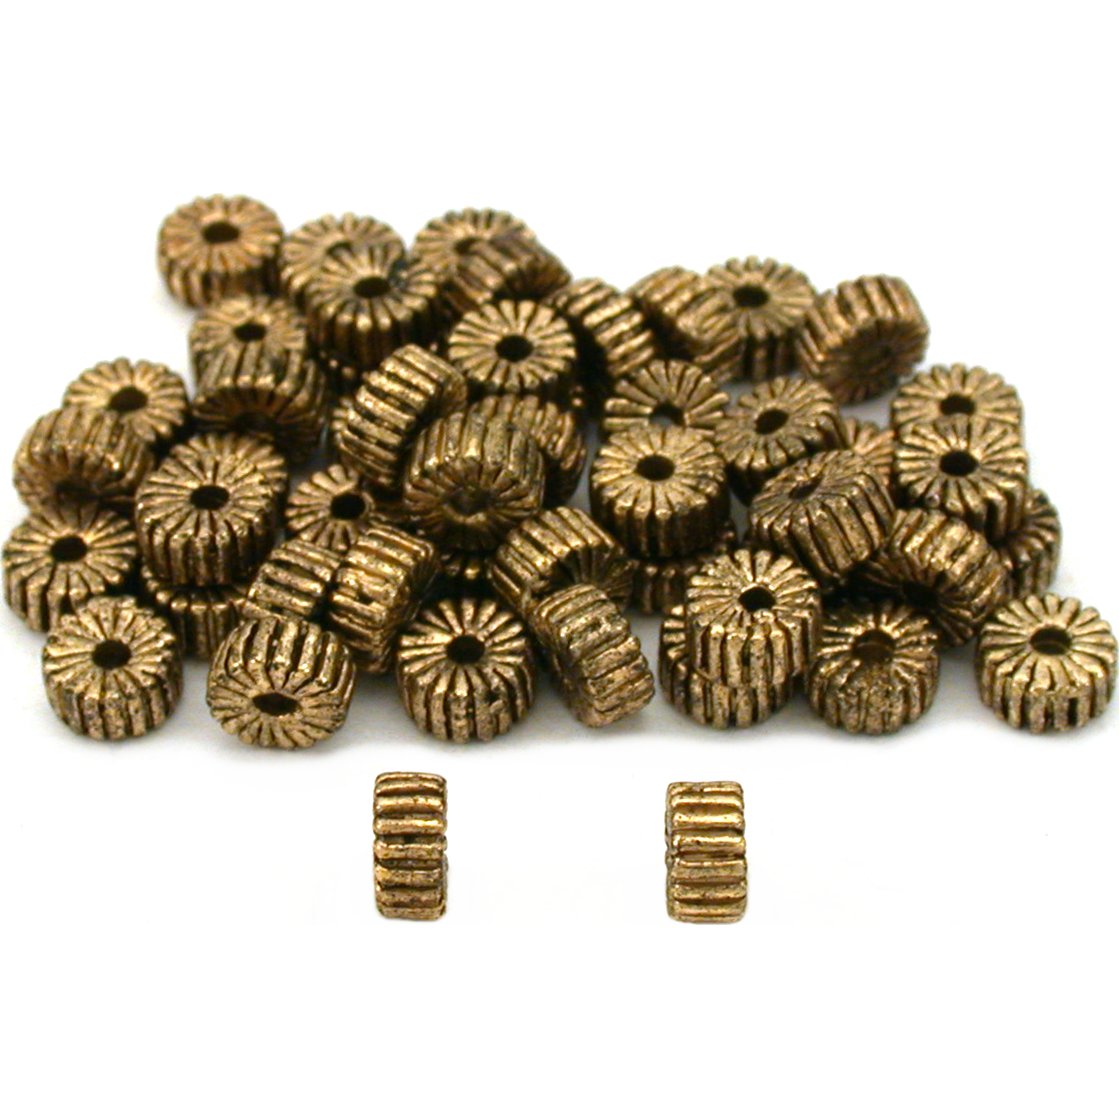 Bali Spacer Corrugated Antique Gold Plated Beads 5mm 50Pcs Approx.